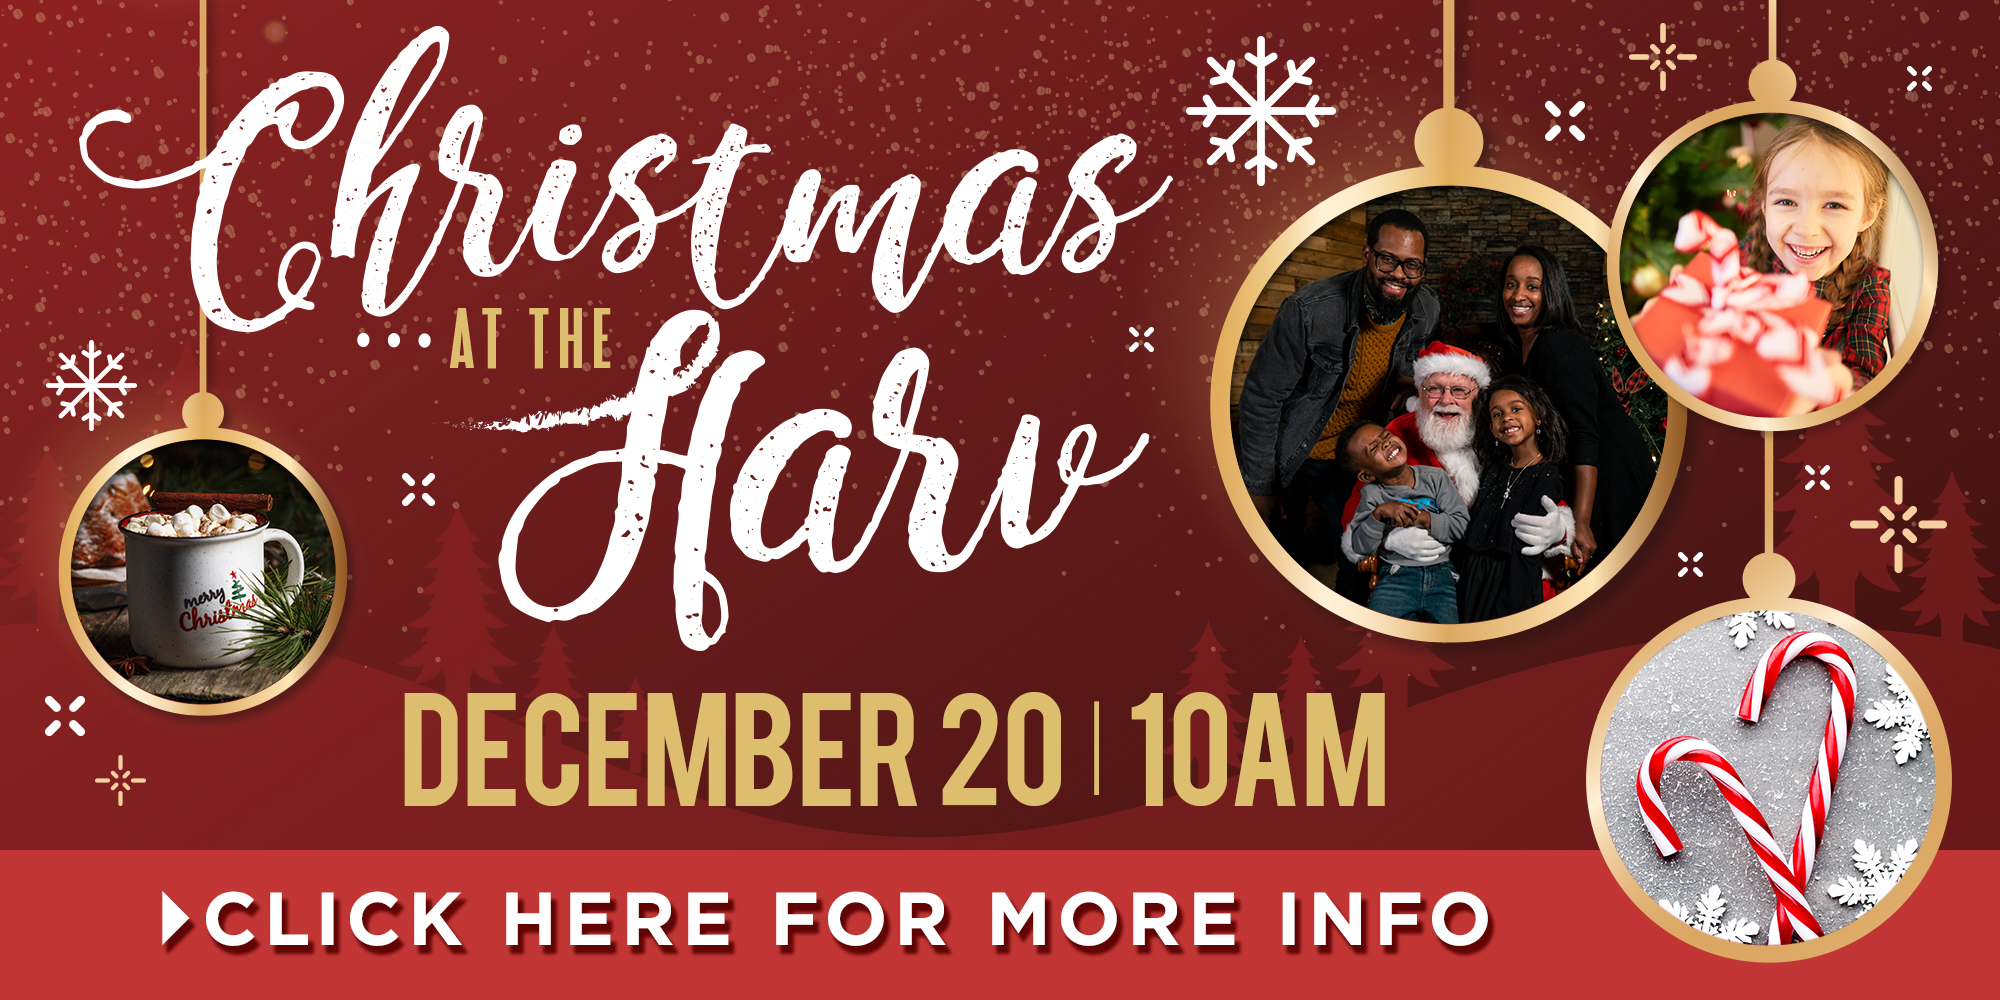 Dec. 20th to meet Santa & Mrs. Claus, enjoy hot cocoa and spiced cider, take home generbread houses, pony rides and more!